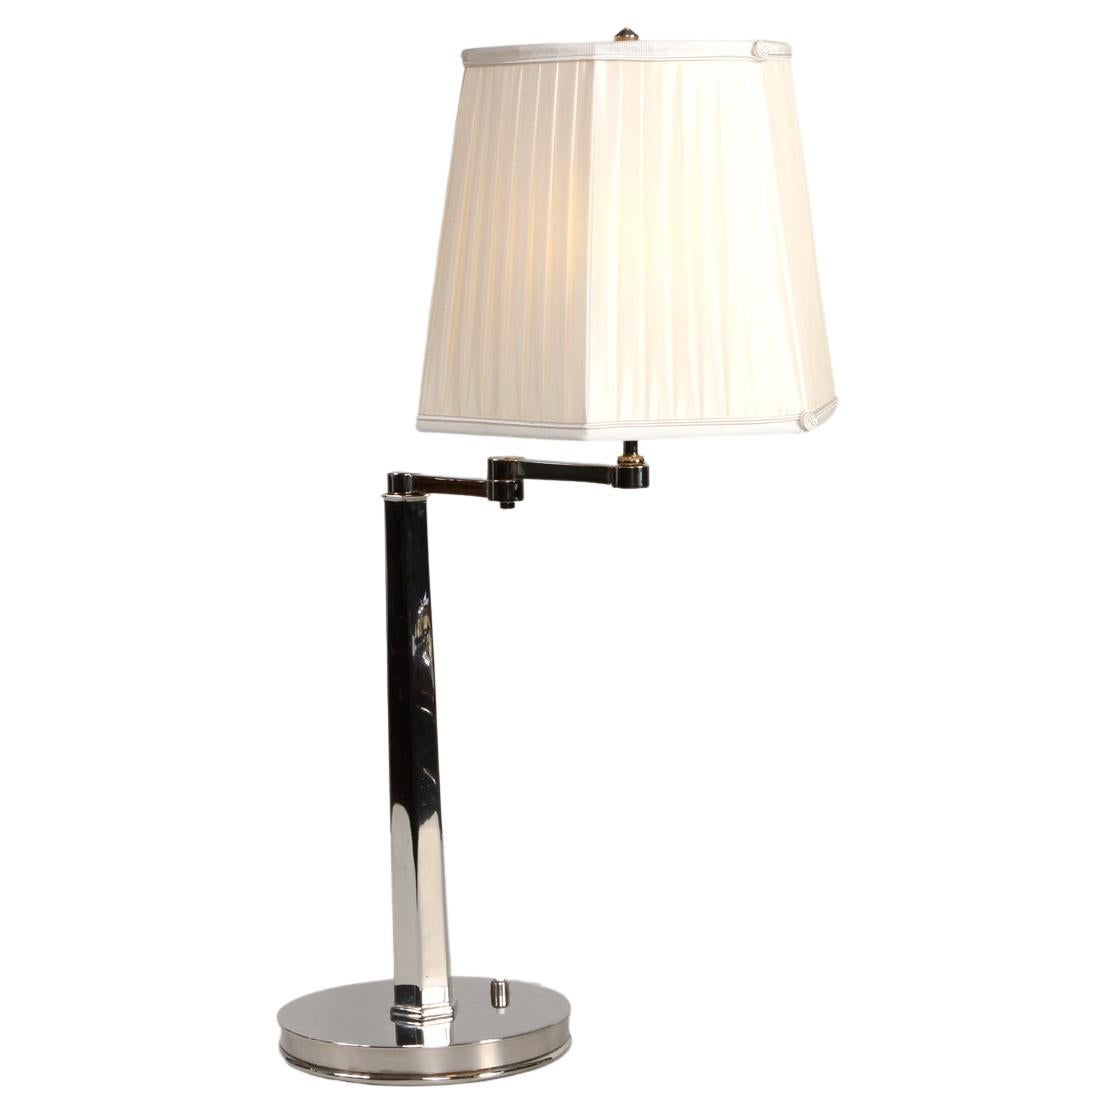 French Art deco table lamp by Dominique  For Sale